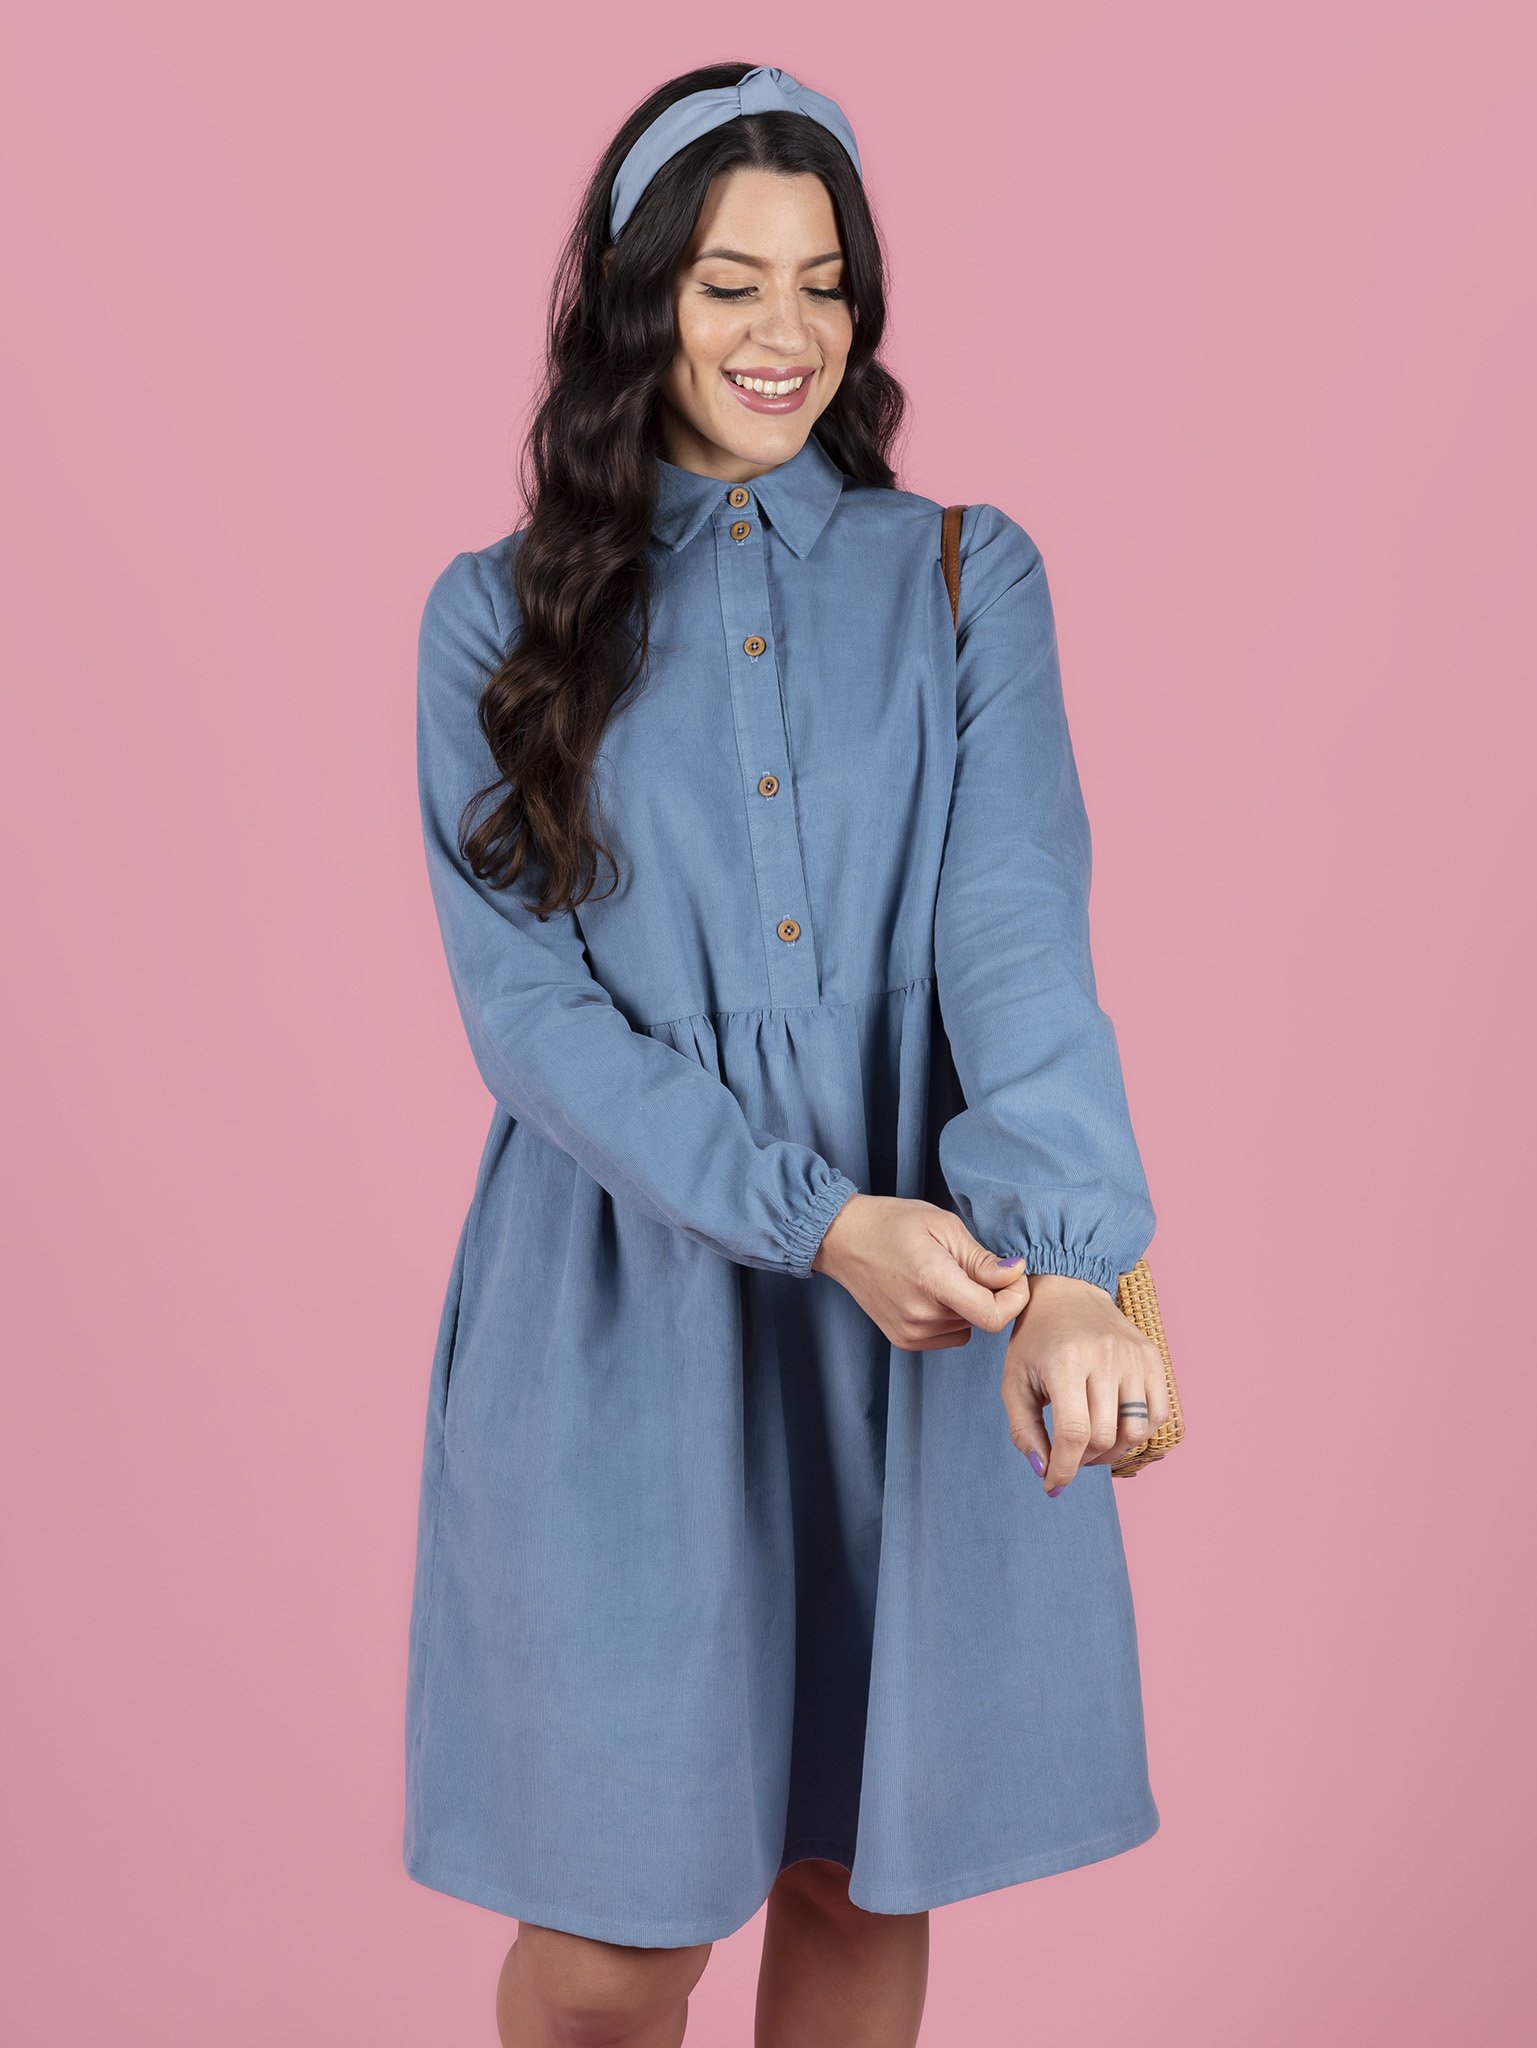 Sew a Shirt Dress - Lyra Dress by Tilly and the Buttons